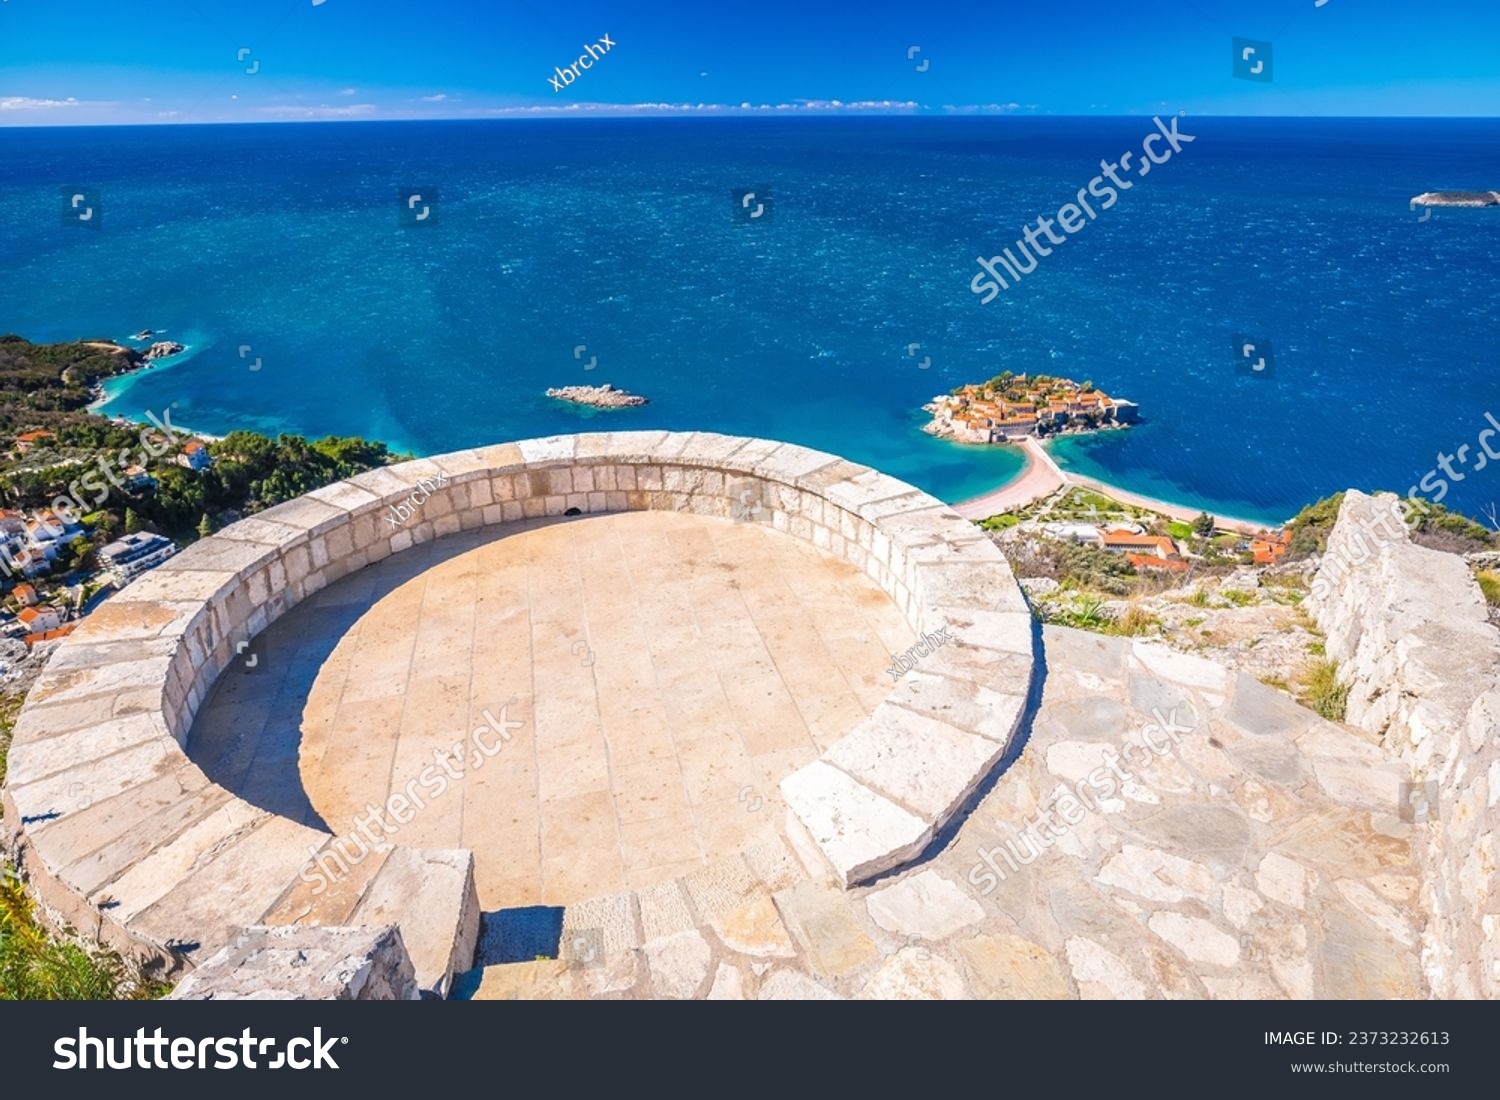 Sveti Stefan historic island village and waterfront view from viewpoint, archipelago of Montenegro #2373232613